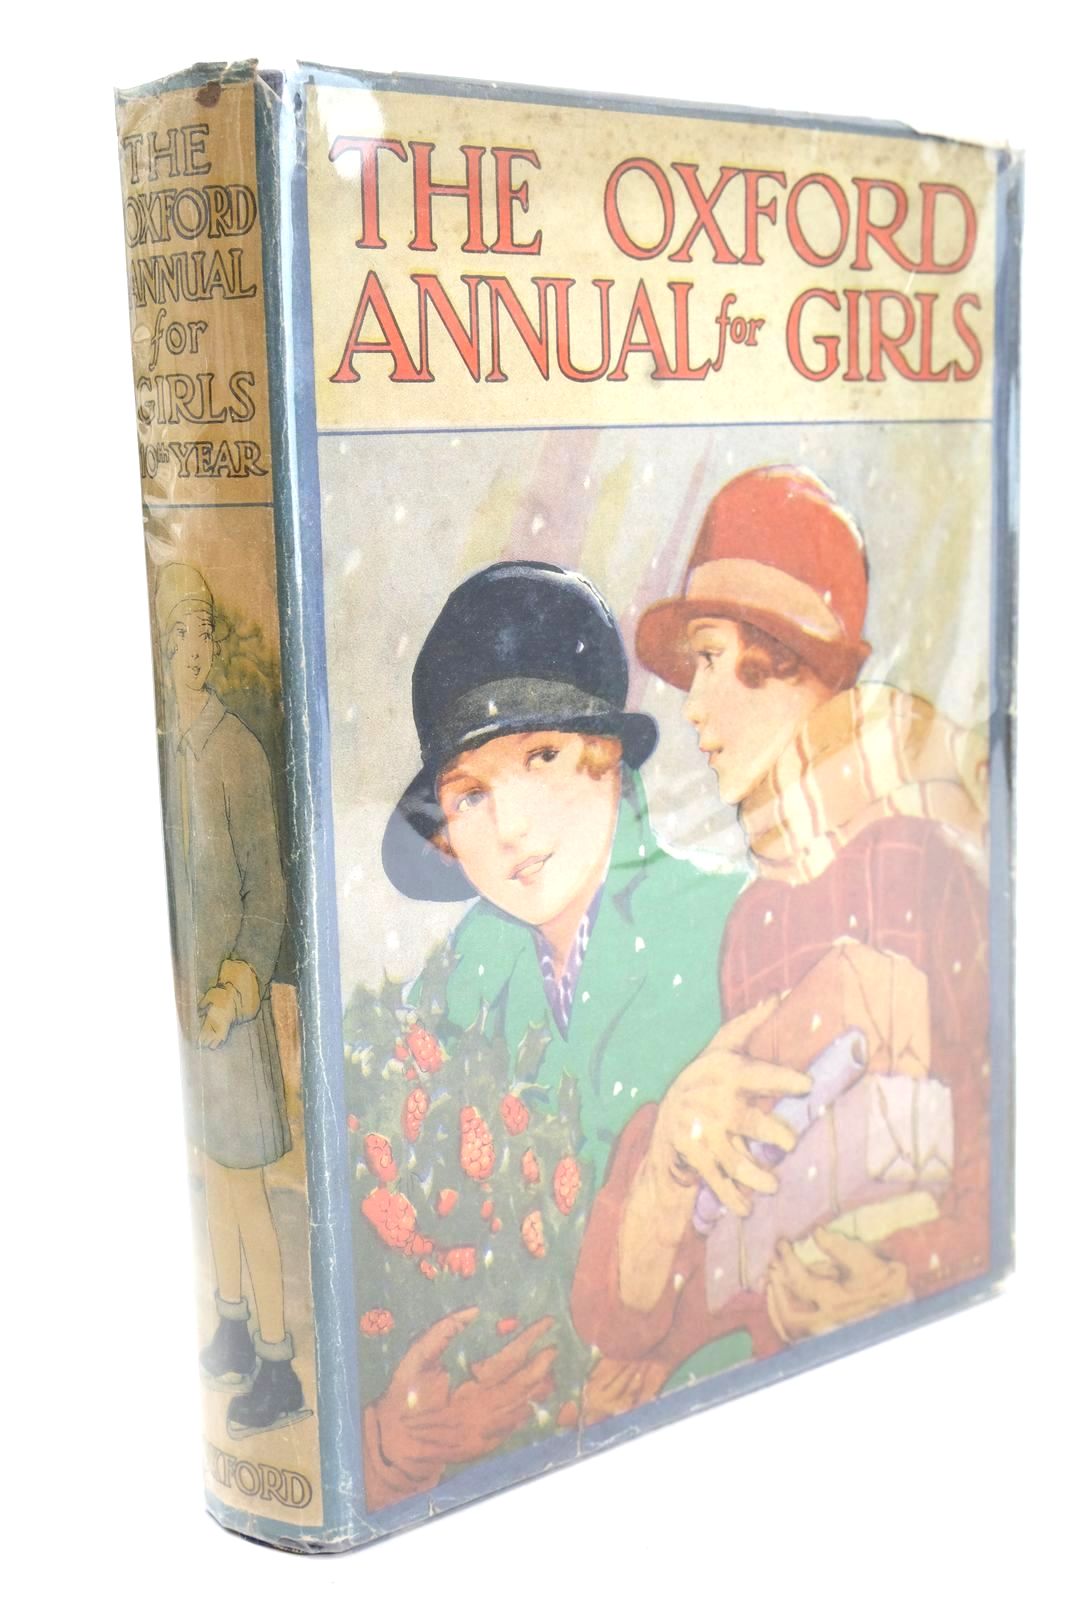 Photo of THE OXFORD ANNUAL FOR GIRLS 10TH YEAR written by Marchant, Bessie Rutley, C. Bernard Bruce, Dorita Fairlie Stowell, Thora et al,  illustrated by Brock, C.E. Griffith, Joan Reeve, Mary Strange Peart, M.A. et al.,  published by Humphrey Milford, Oxford University Press (STOCK CODE: 1324967)  for sale by Stella & Rose's Books